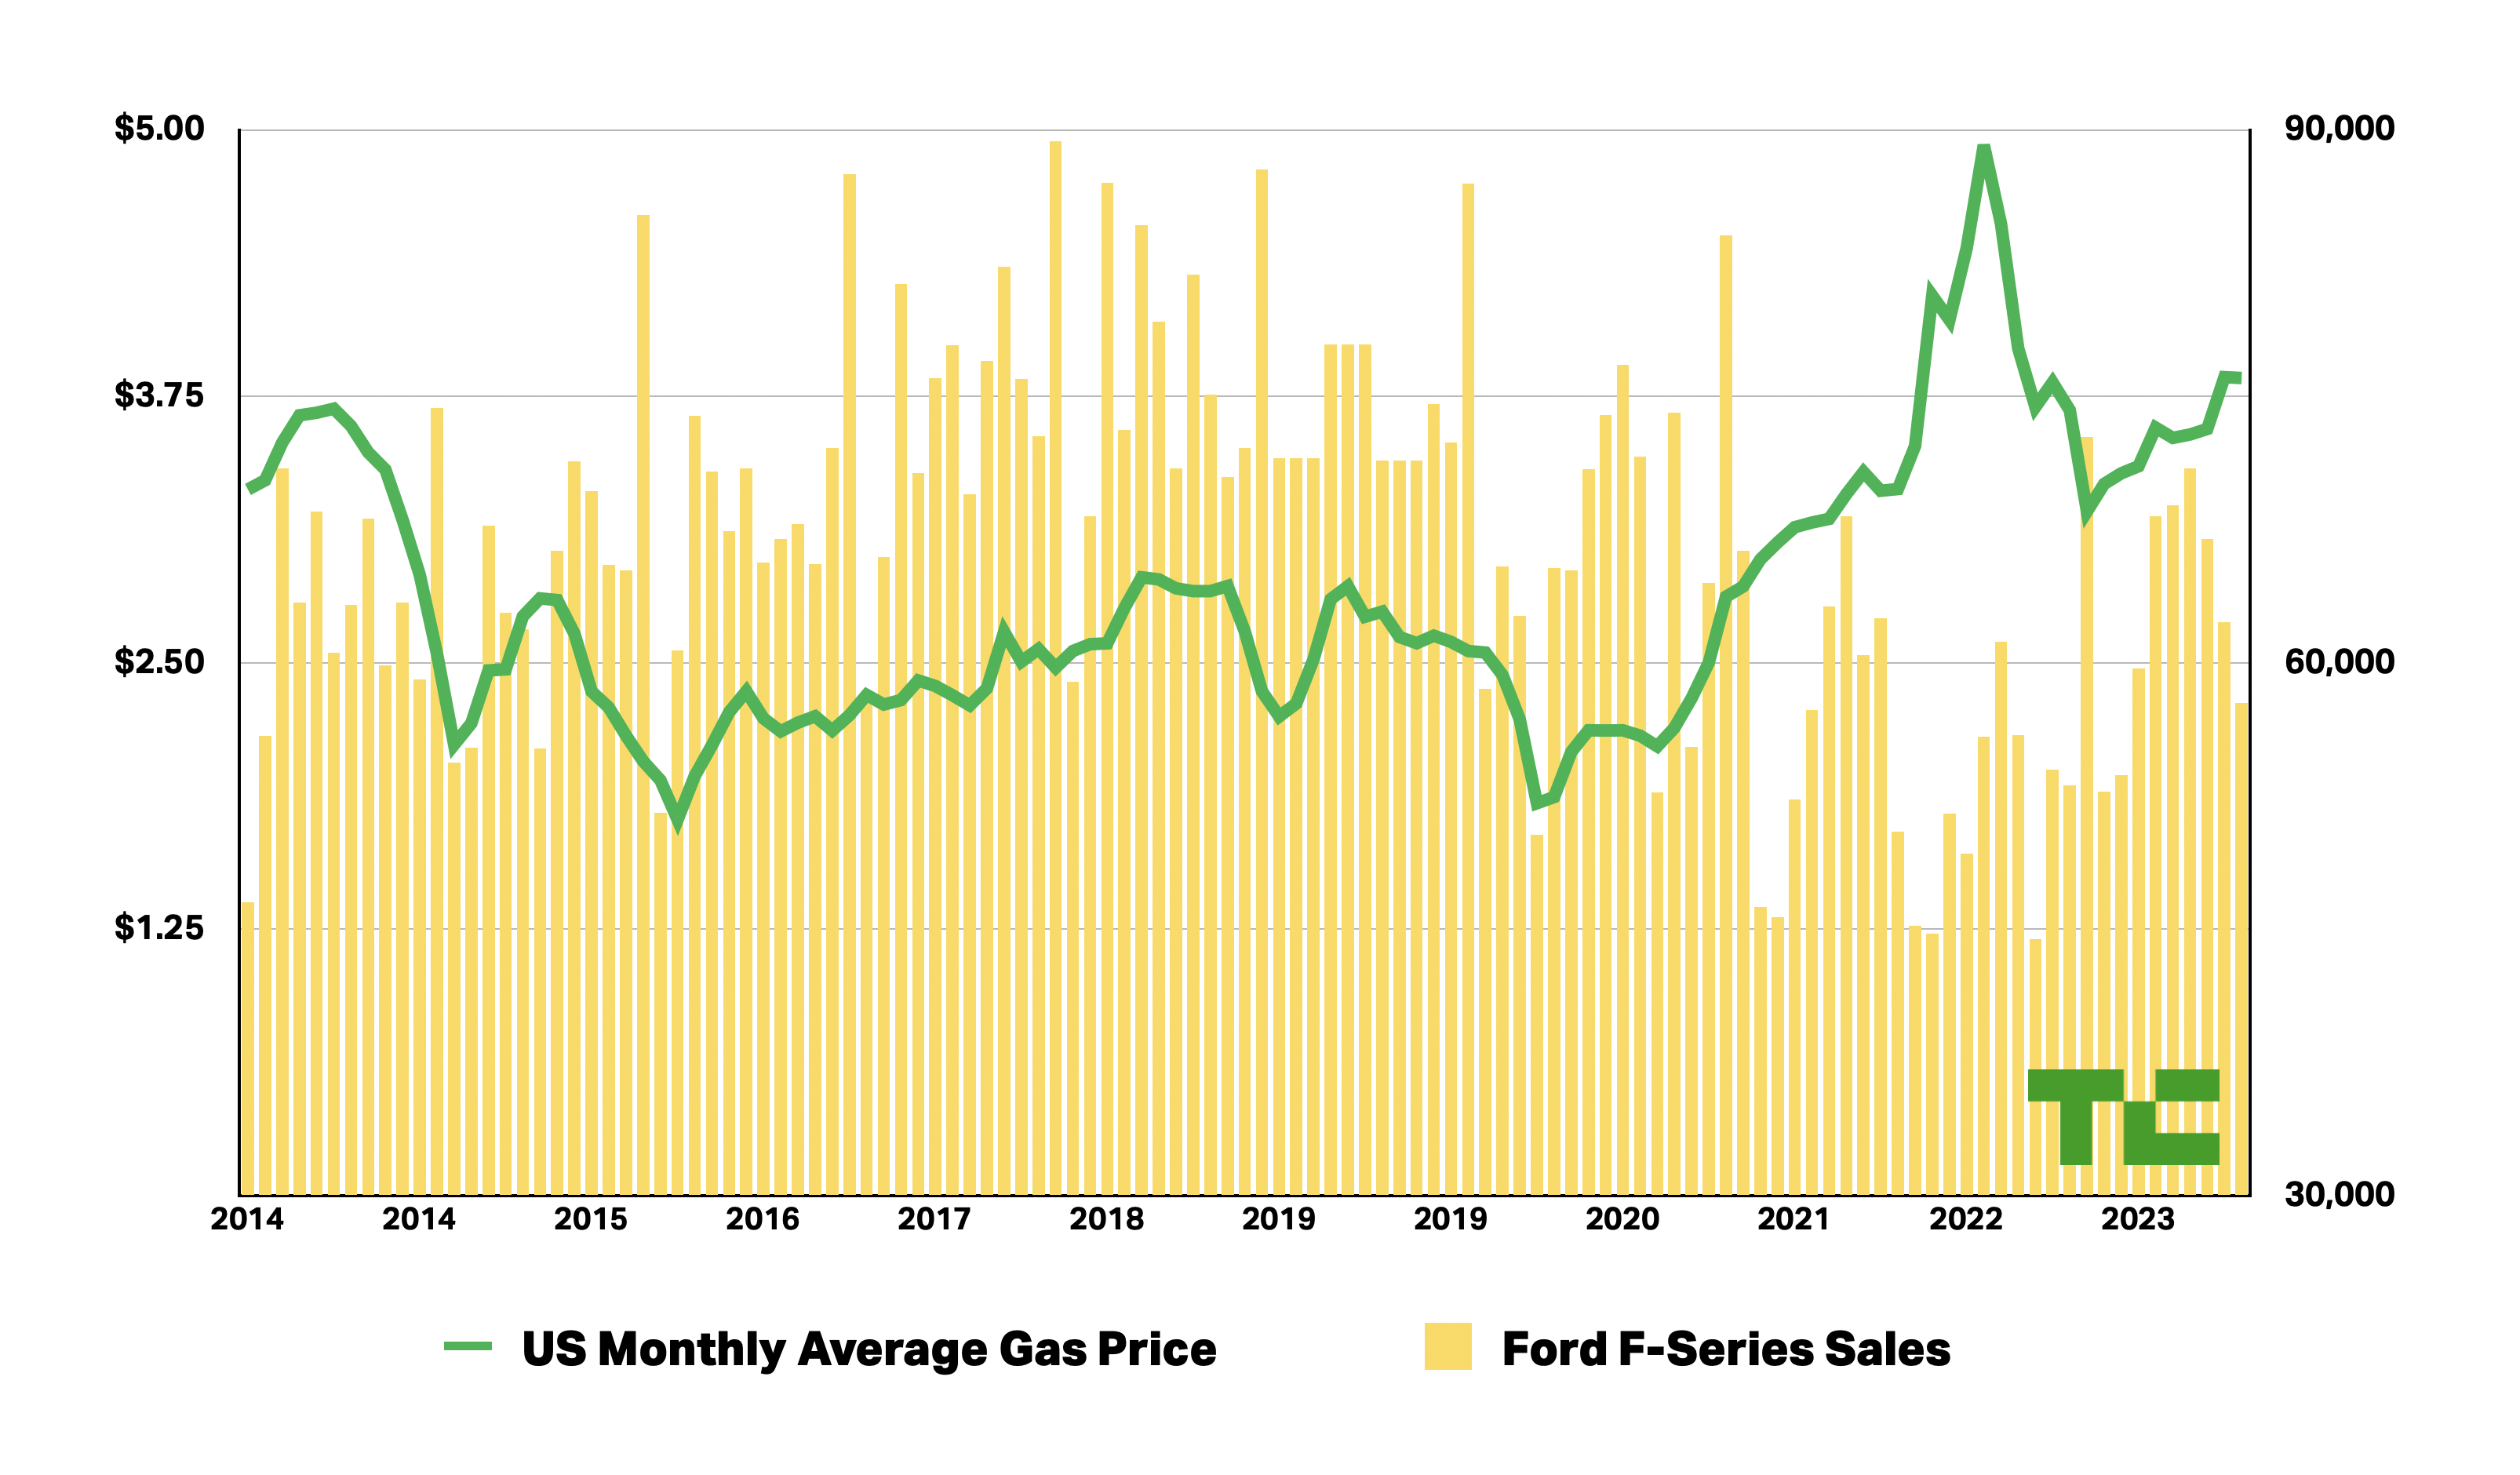 Ford F-Series sales were tracked alongside U.S. gas prices from 2014-2023.